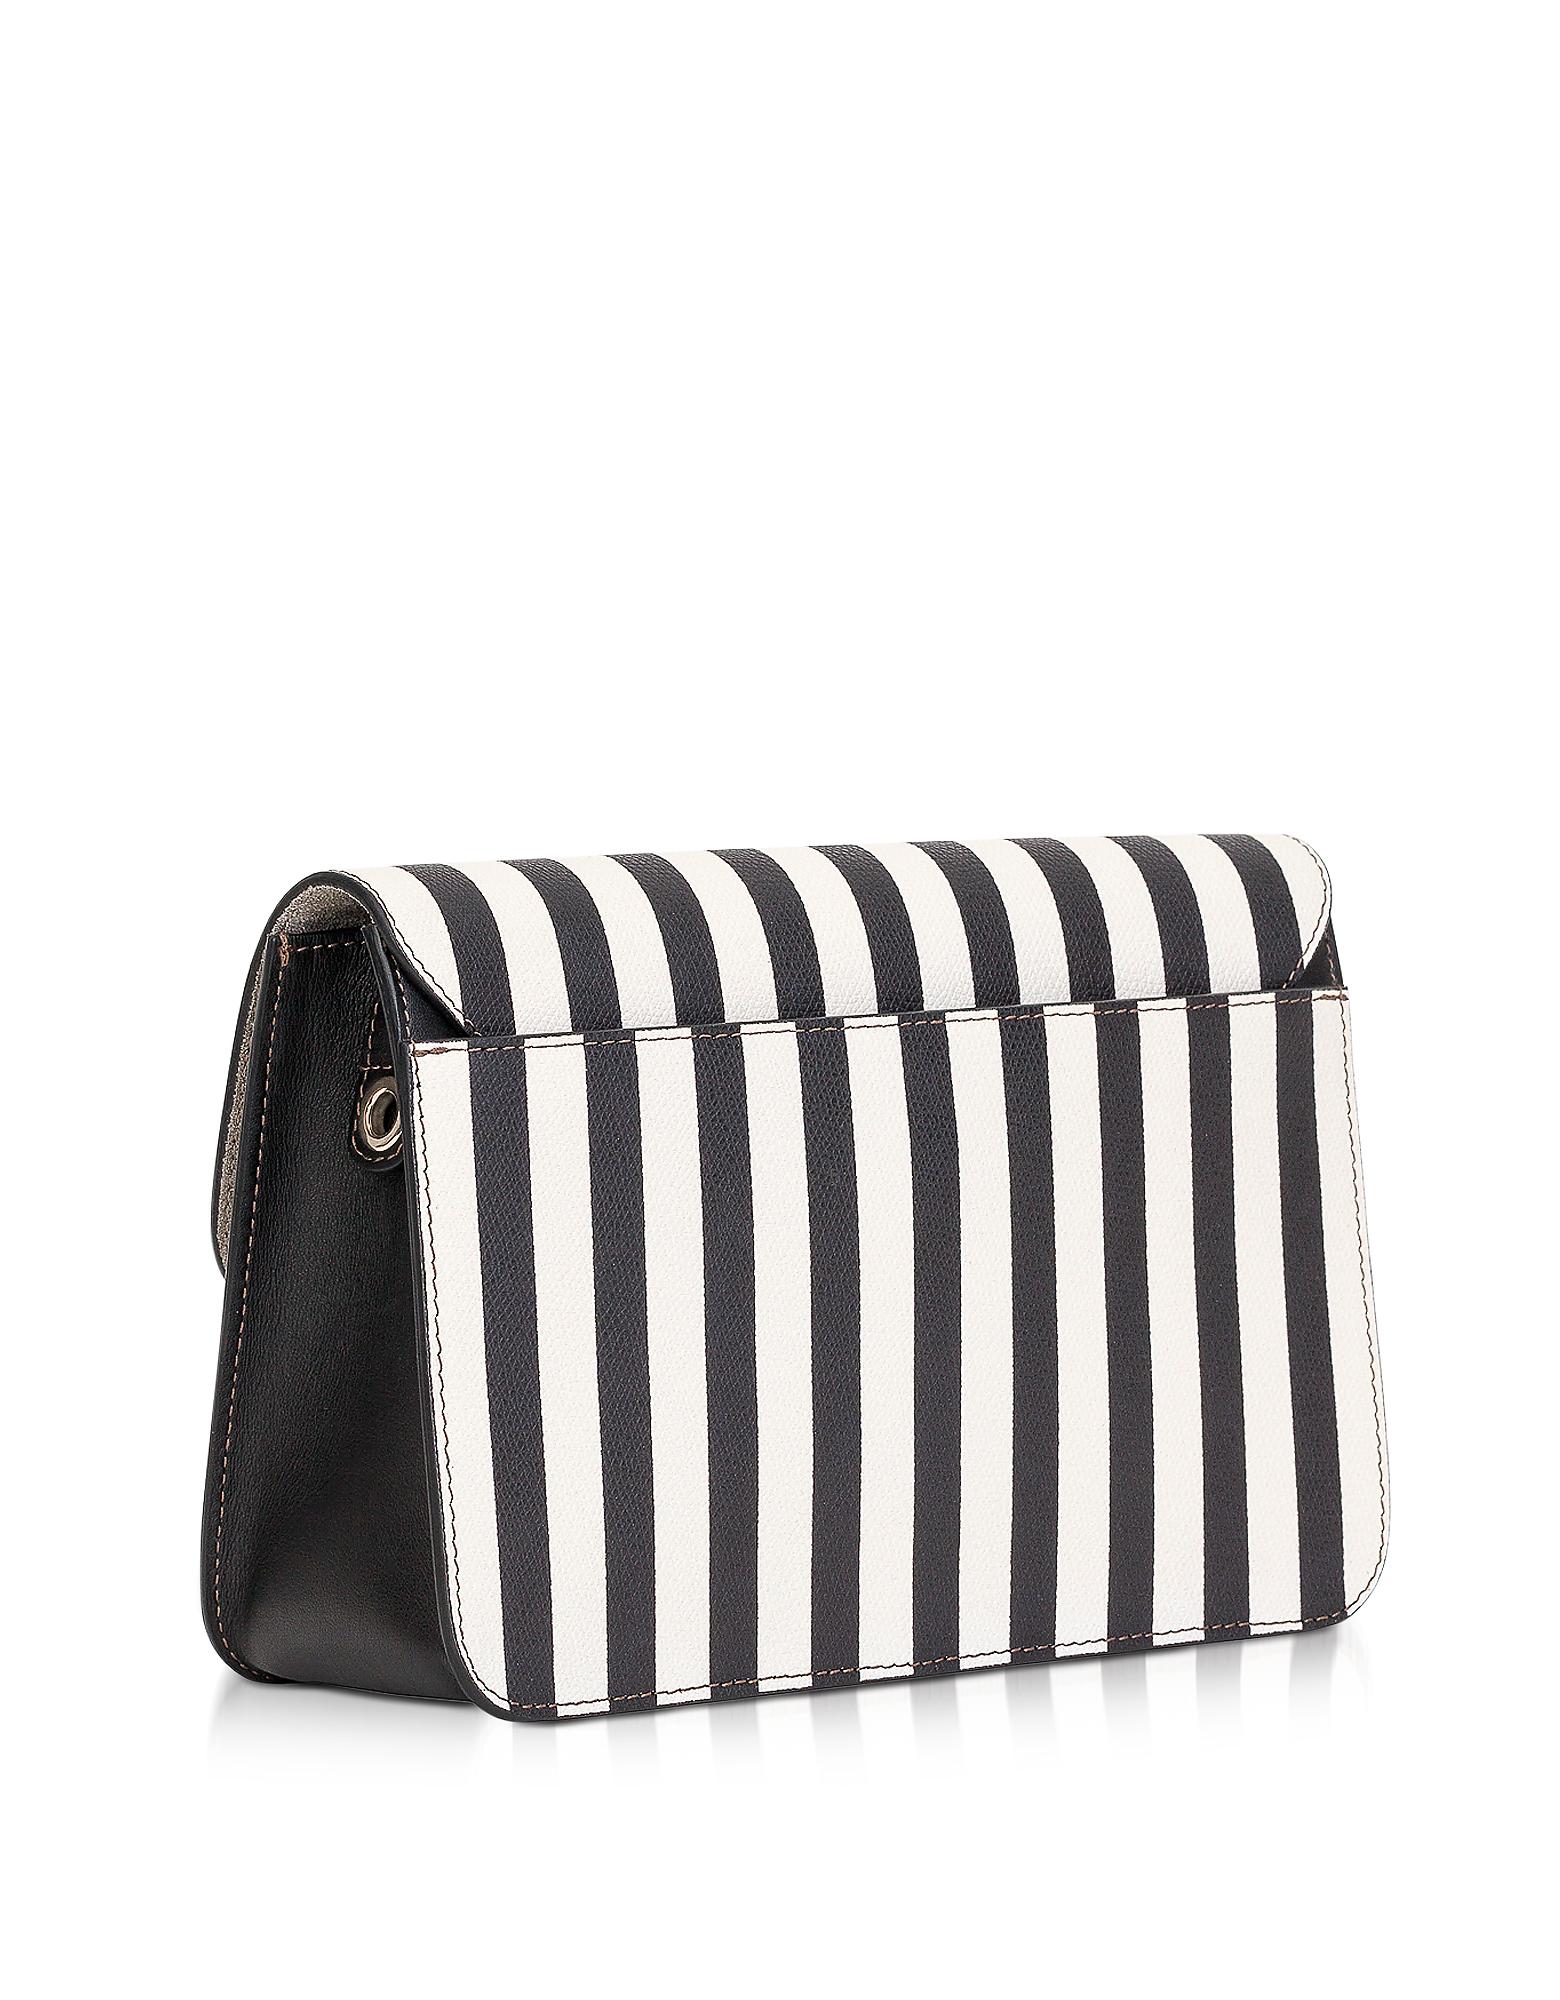 Furla Black And White Striped Leather Metropolis Small Shoulder Bag - Lyst